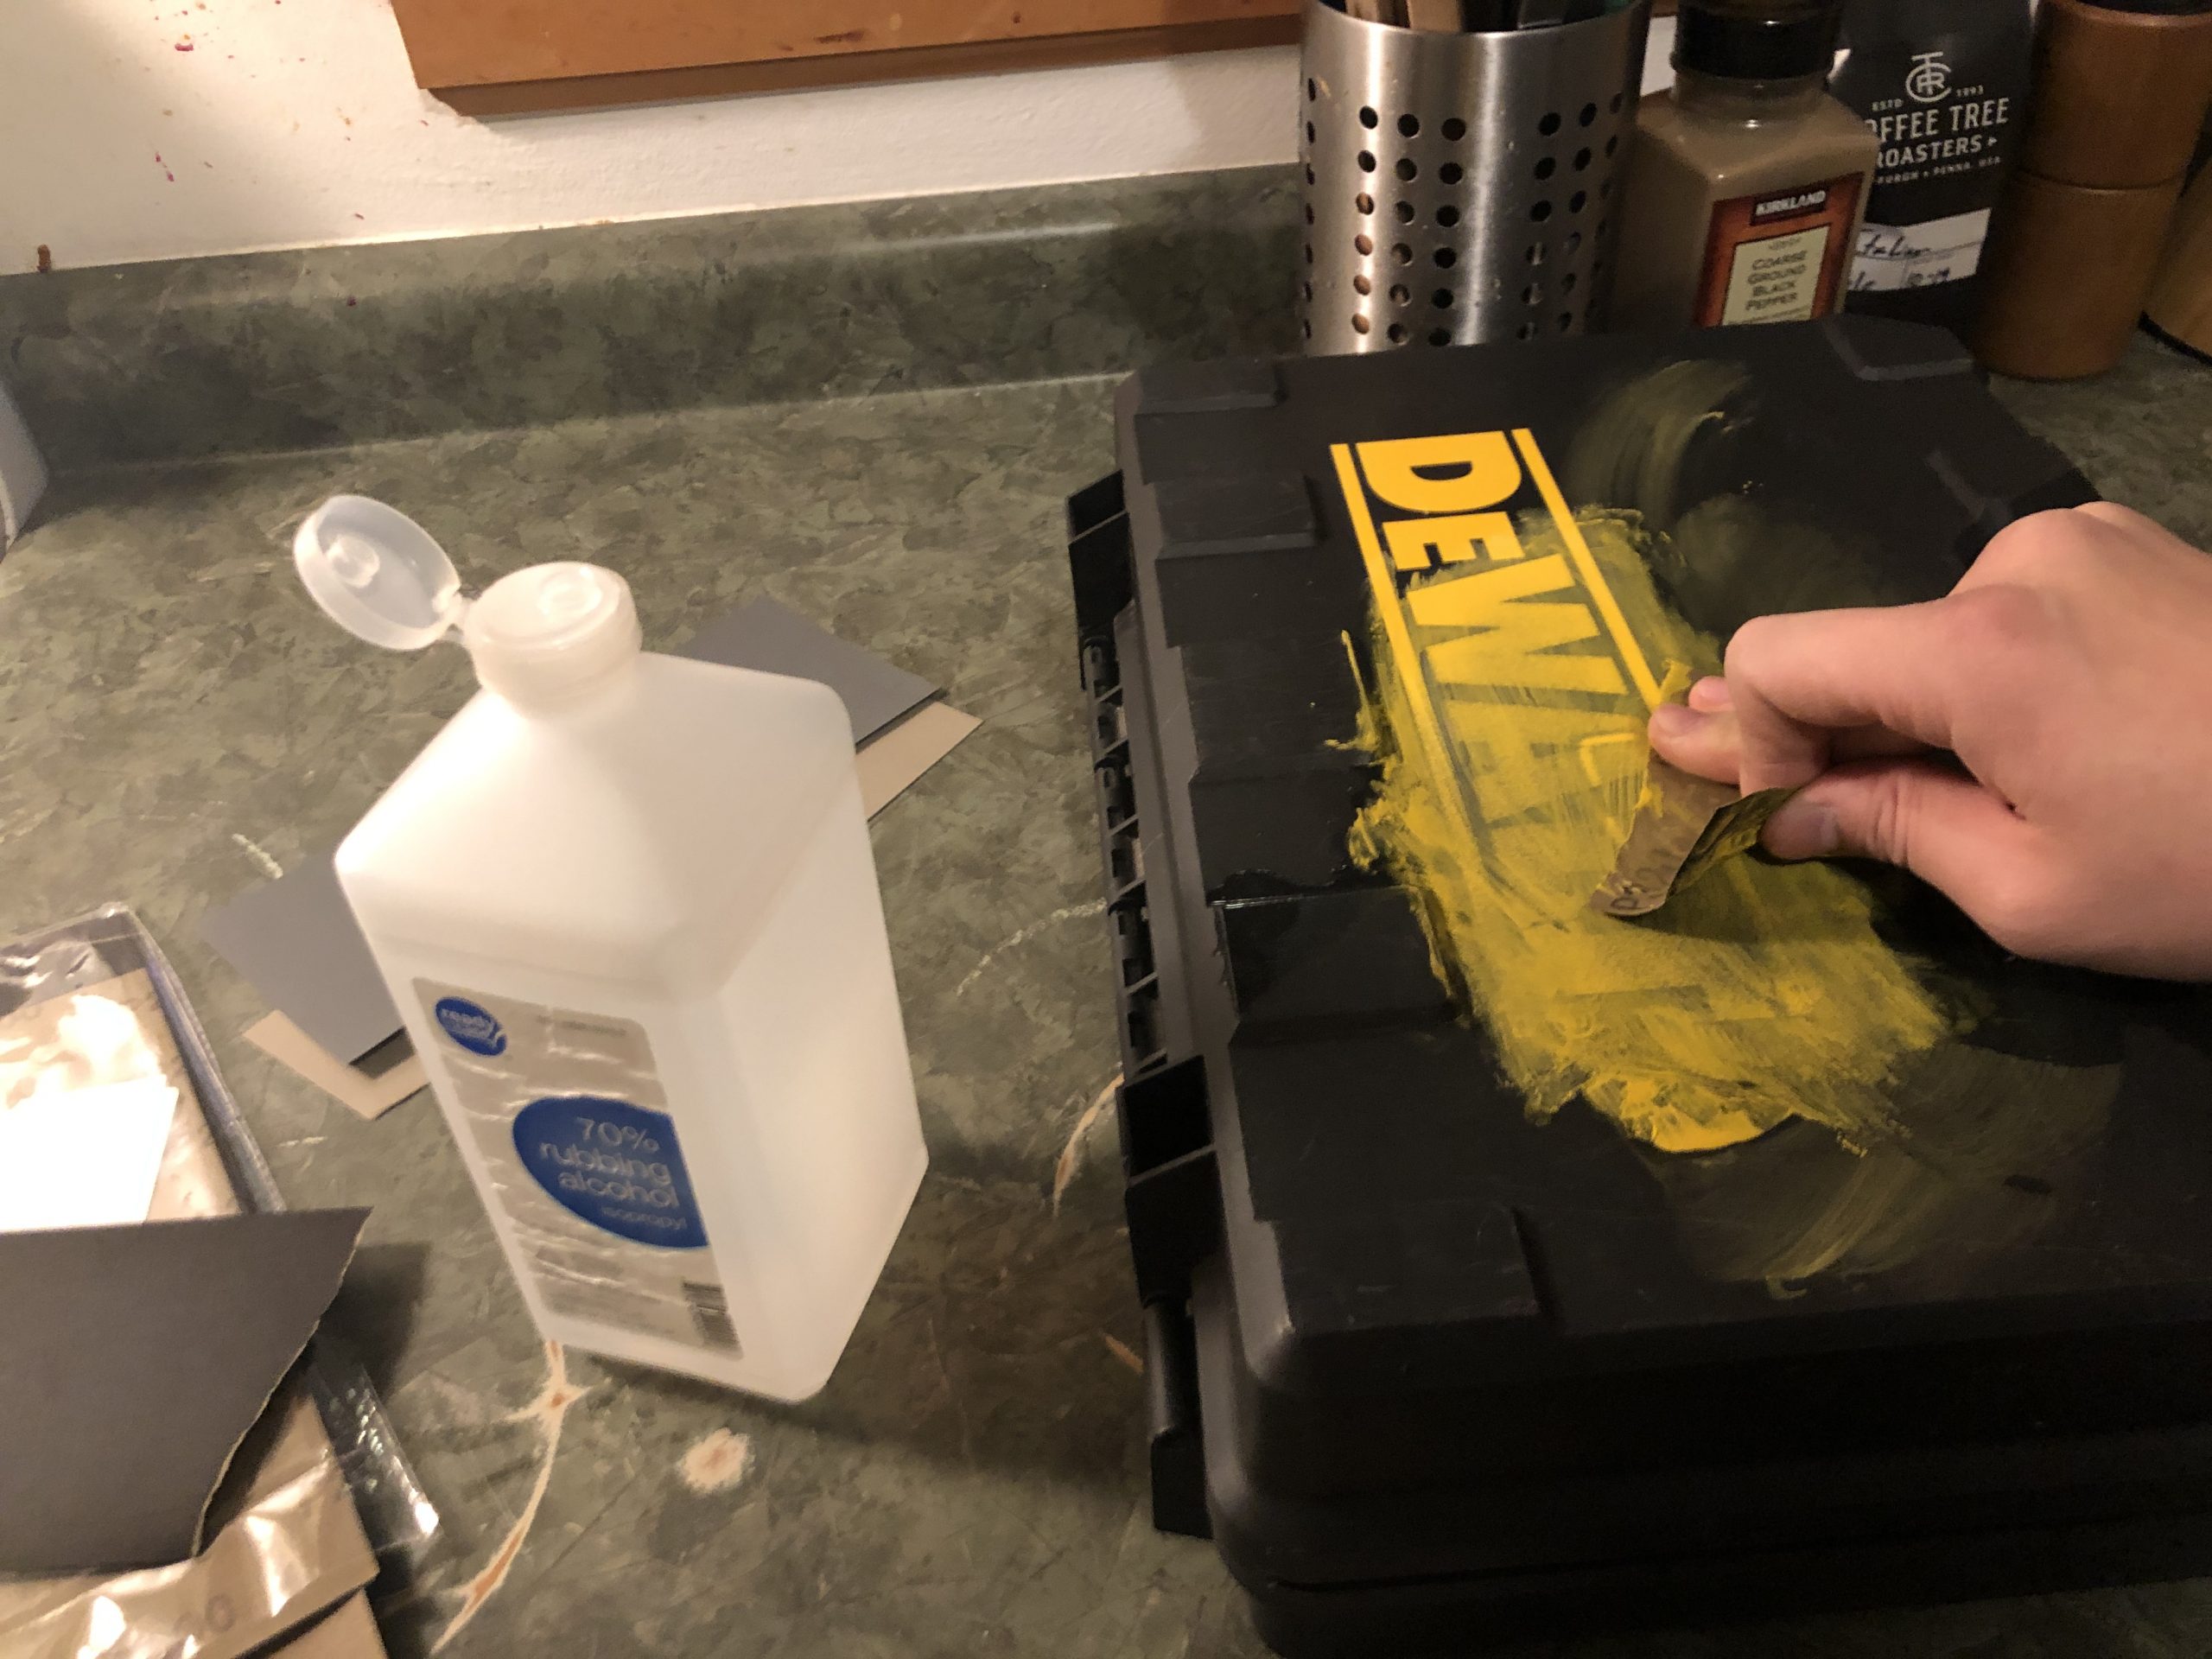 Removing the DeWalt logo using sandpaper. I should've used acetone, it would have been much faster